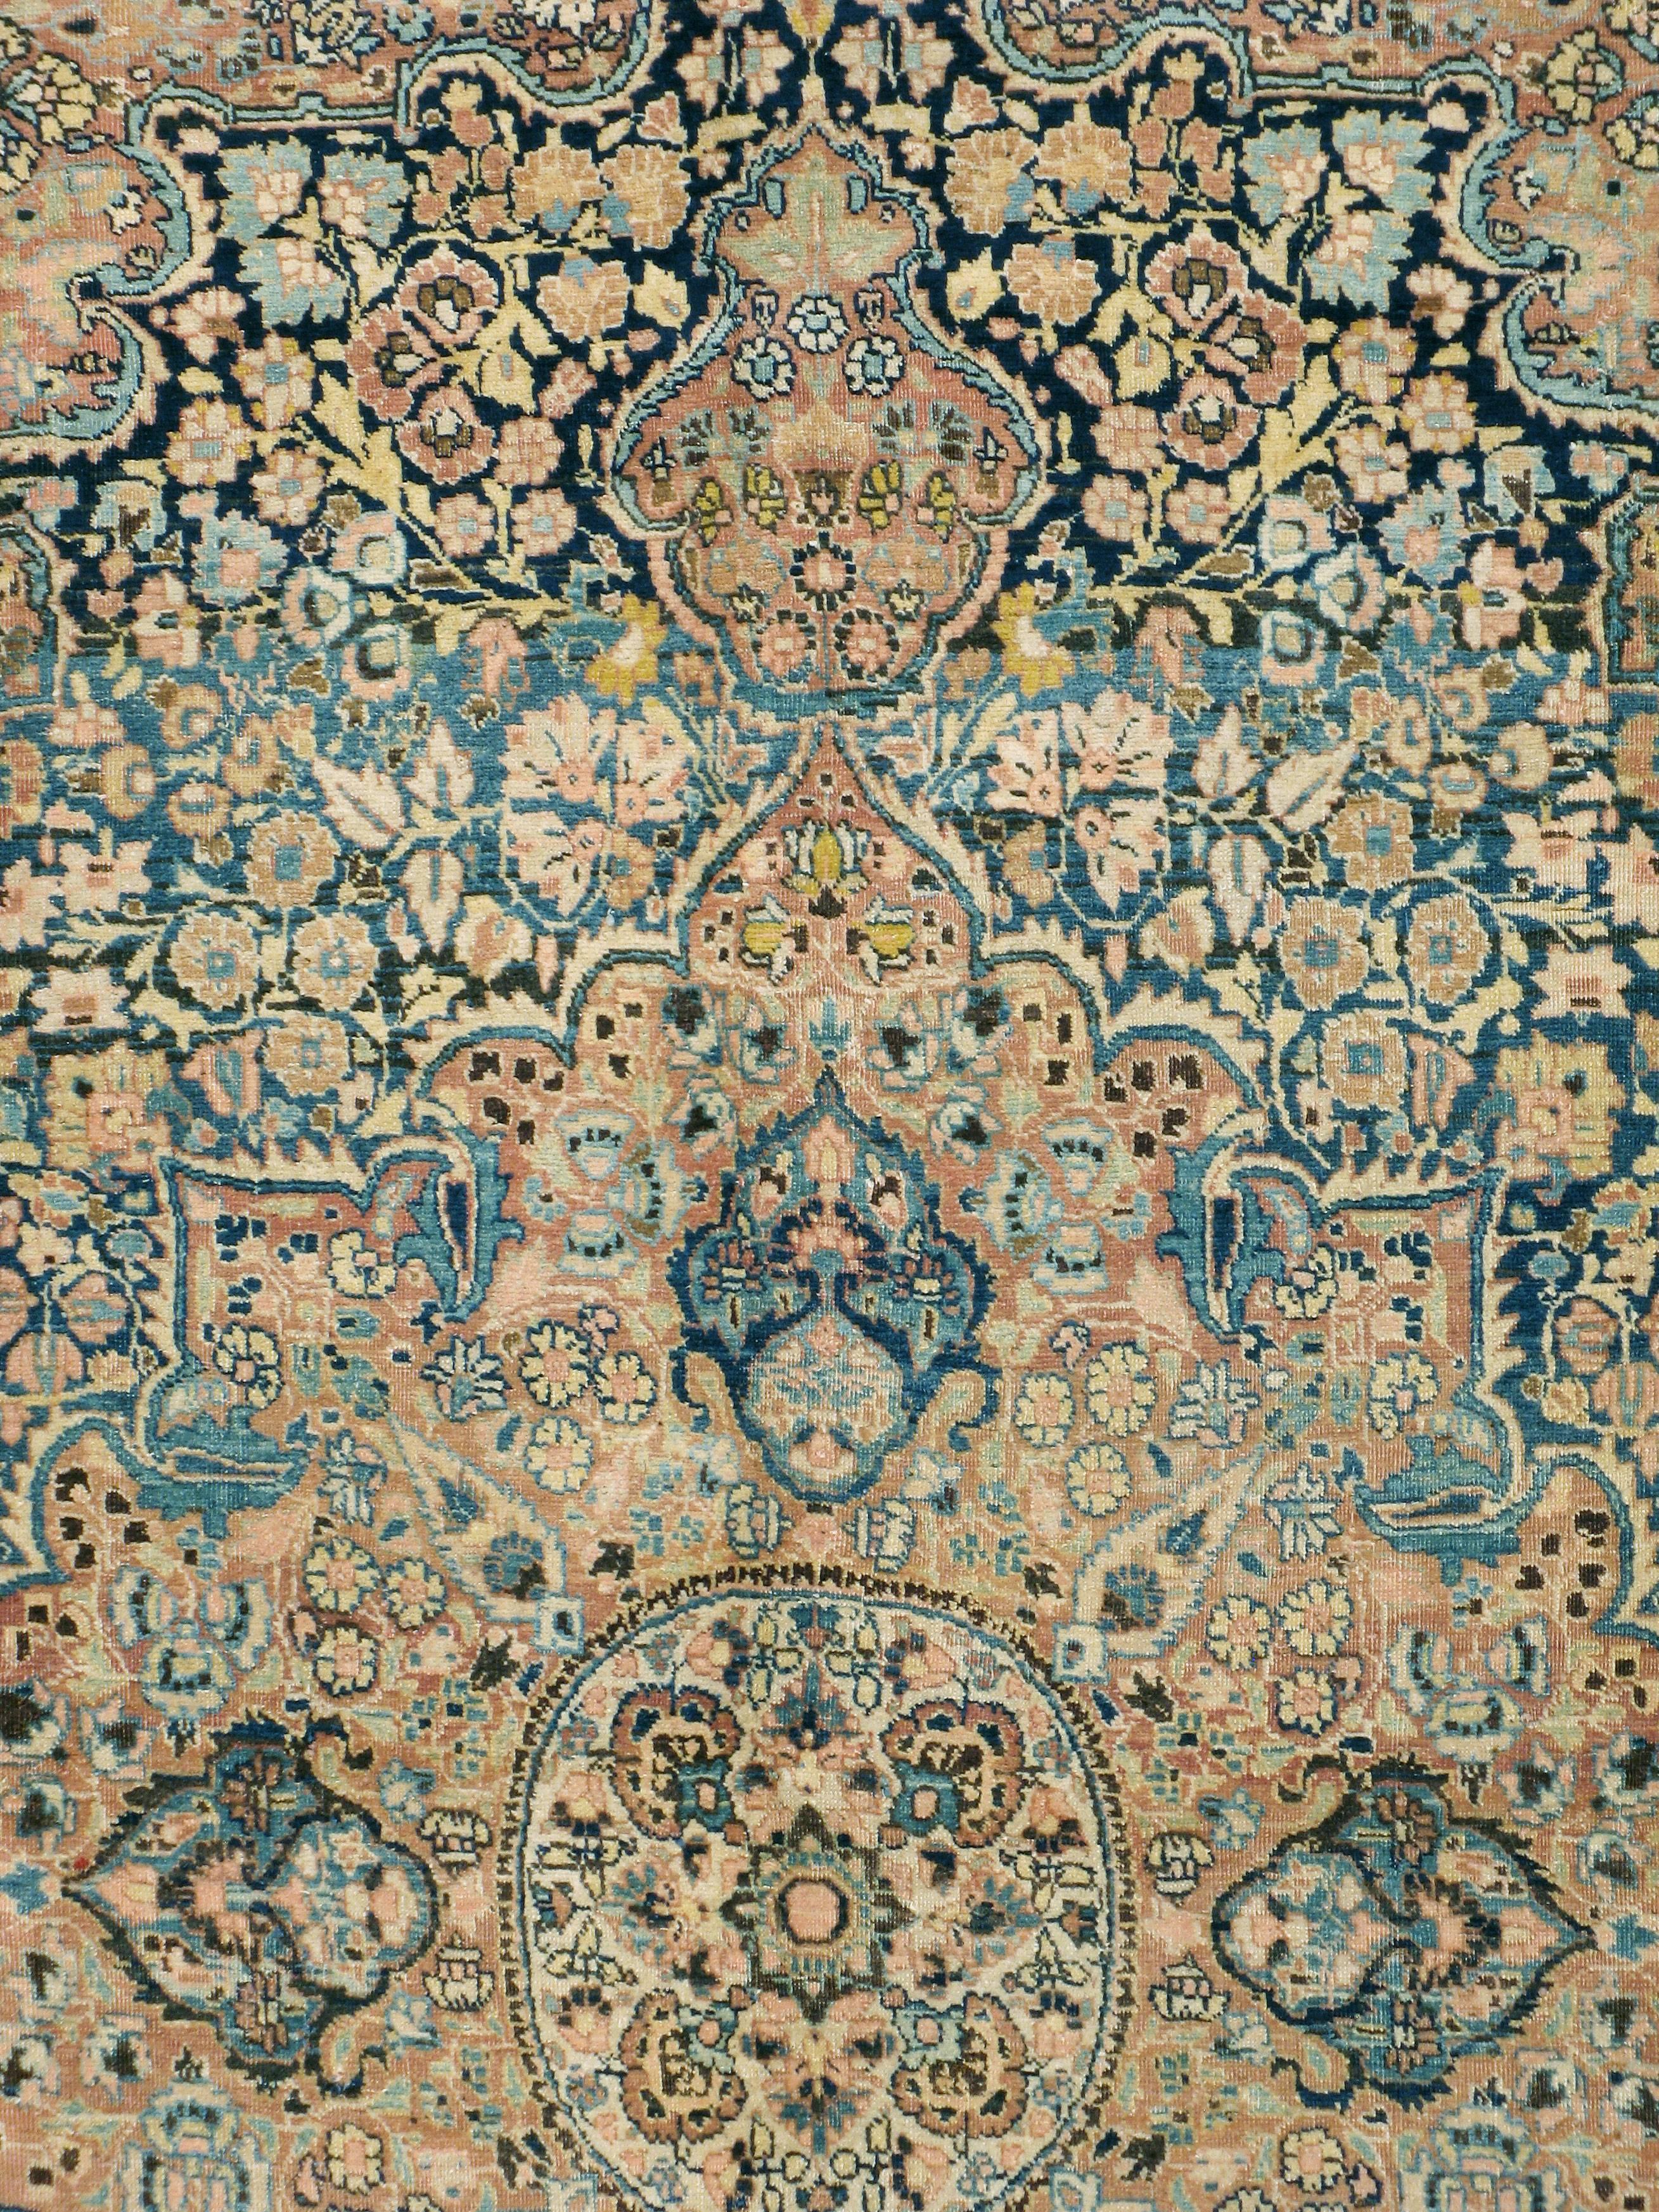 A vintage Persian Mashad carpet from the second quarter of the 20th century. Mashad carpets are famous for their intricate, fully realized medallion designs. This navy ground piece is a perfect exemplar of the genre with a salmon eight point